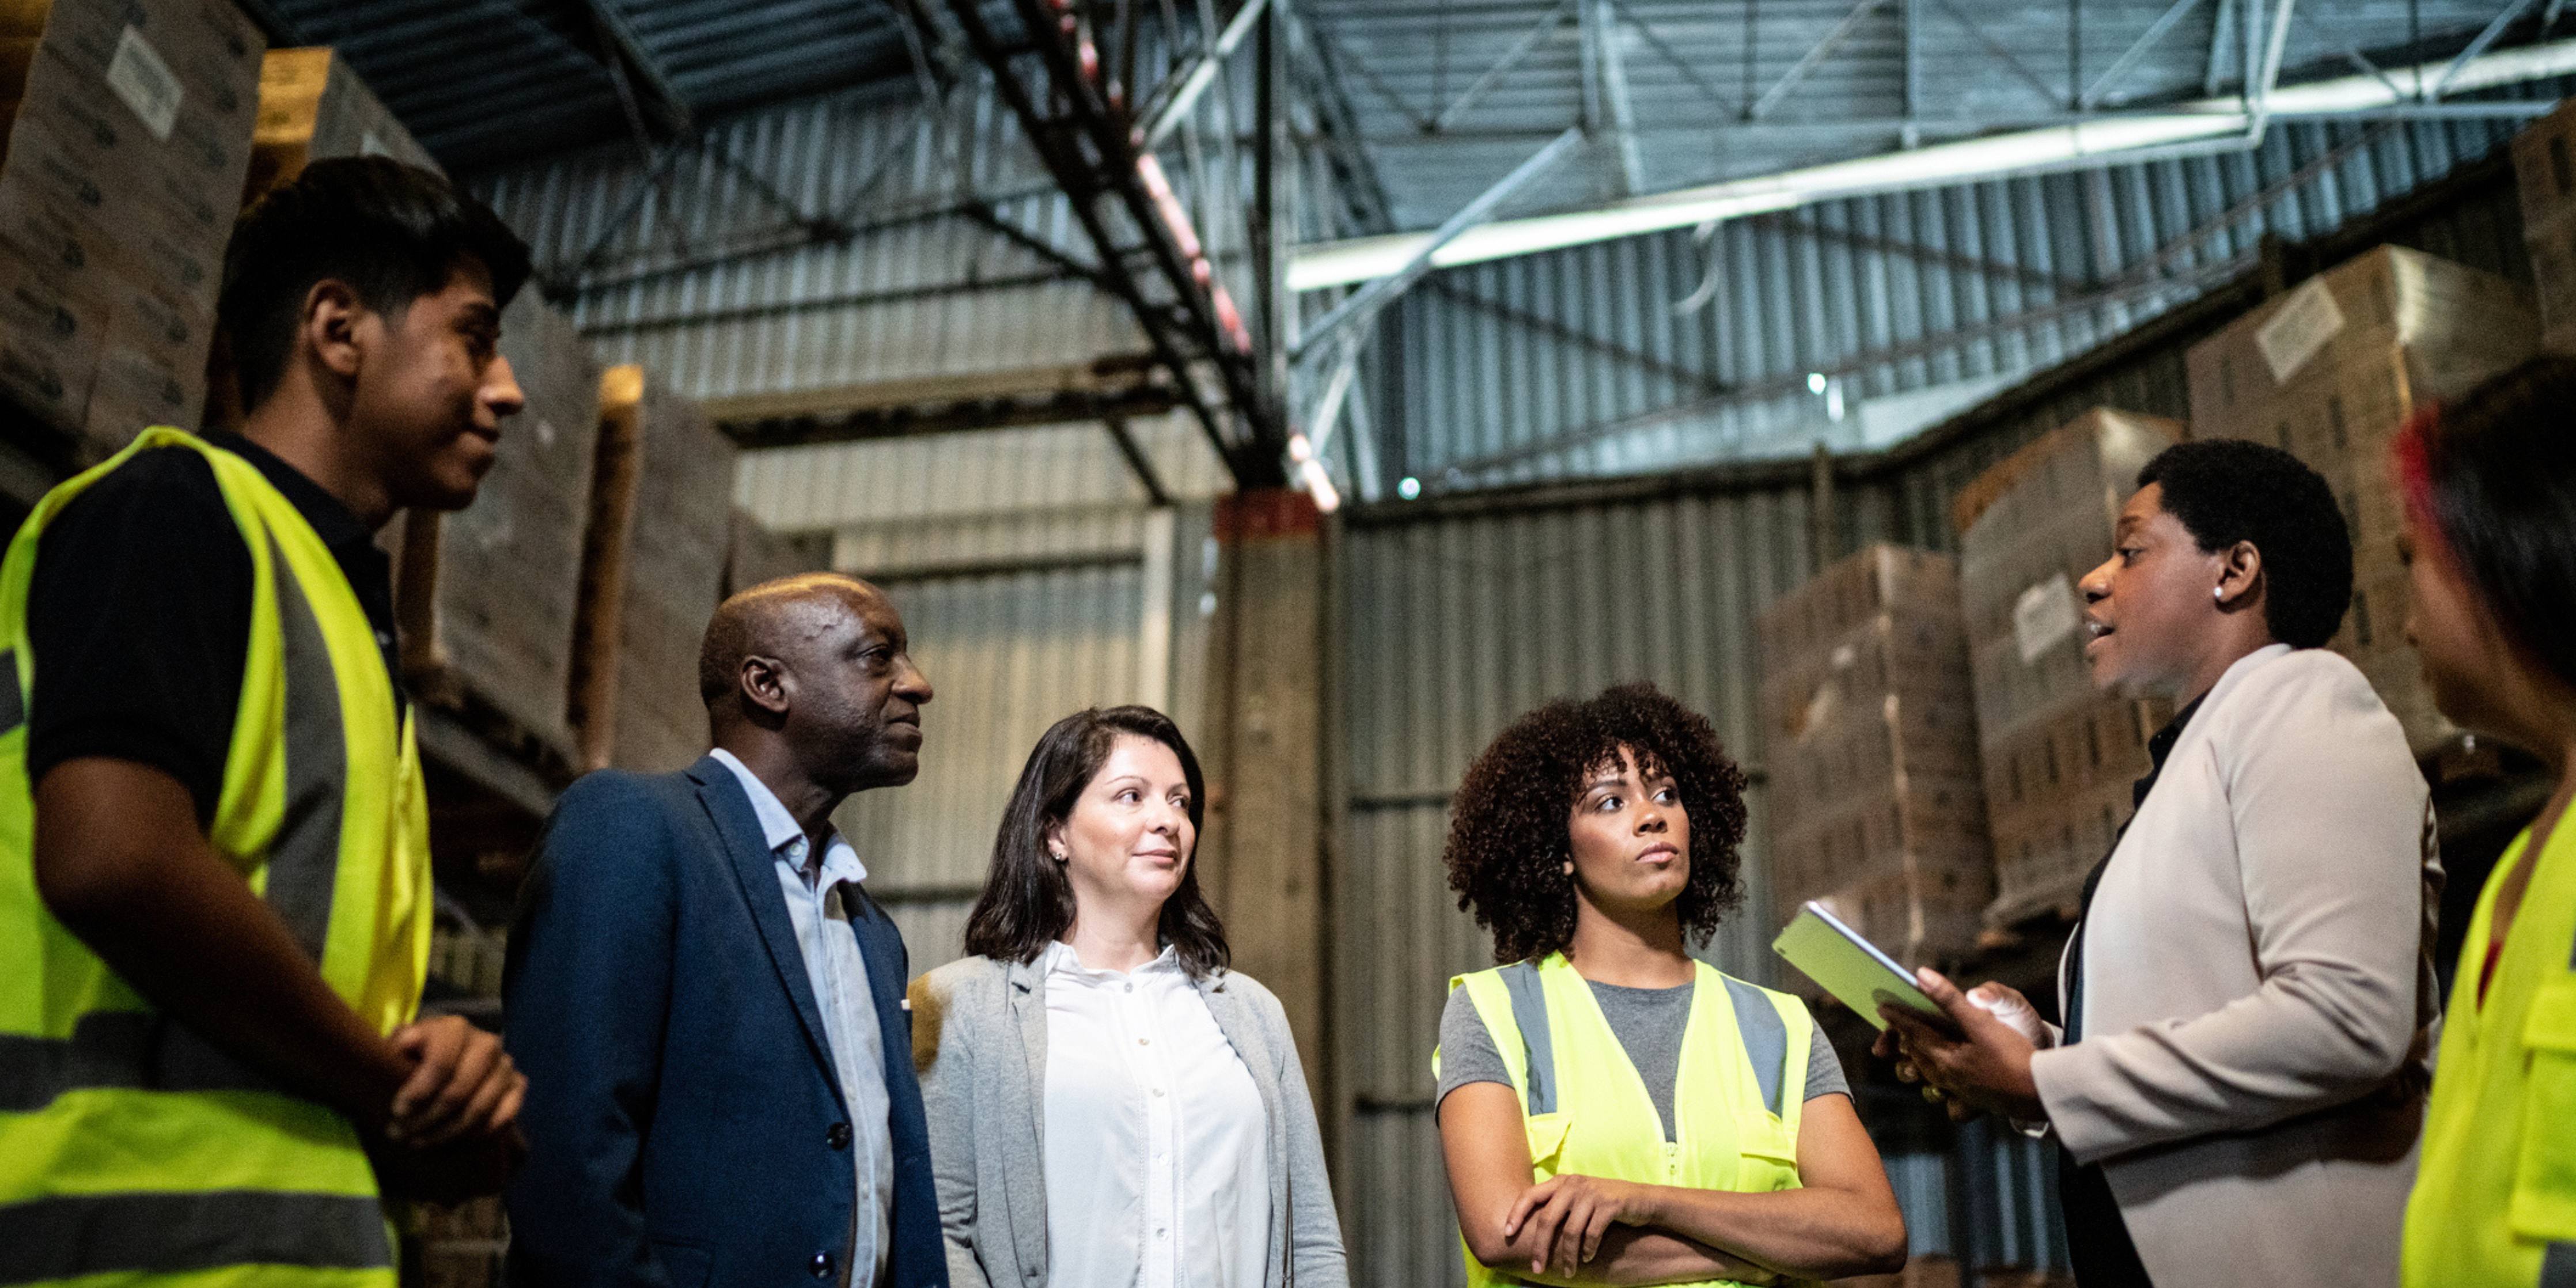 Image  of group talking in a warehouse